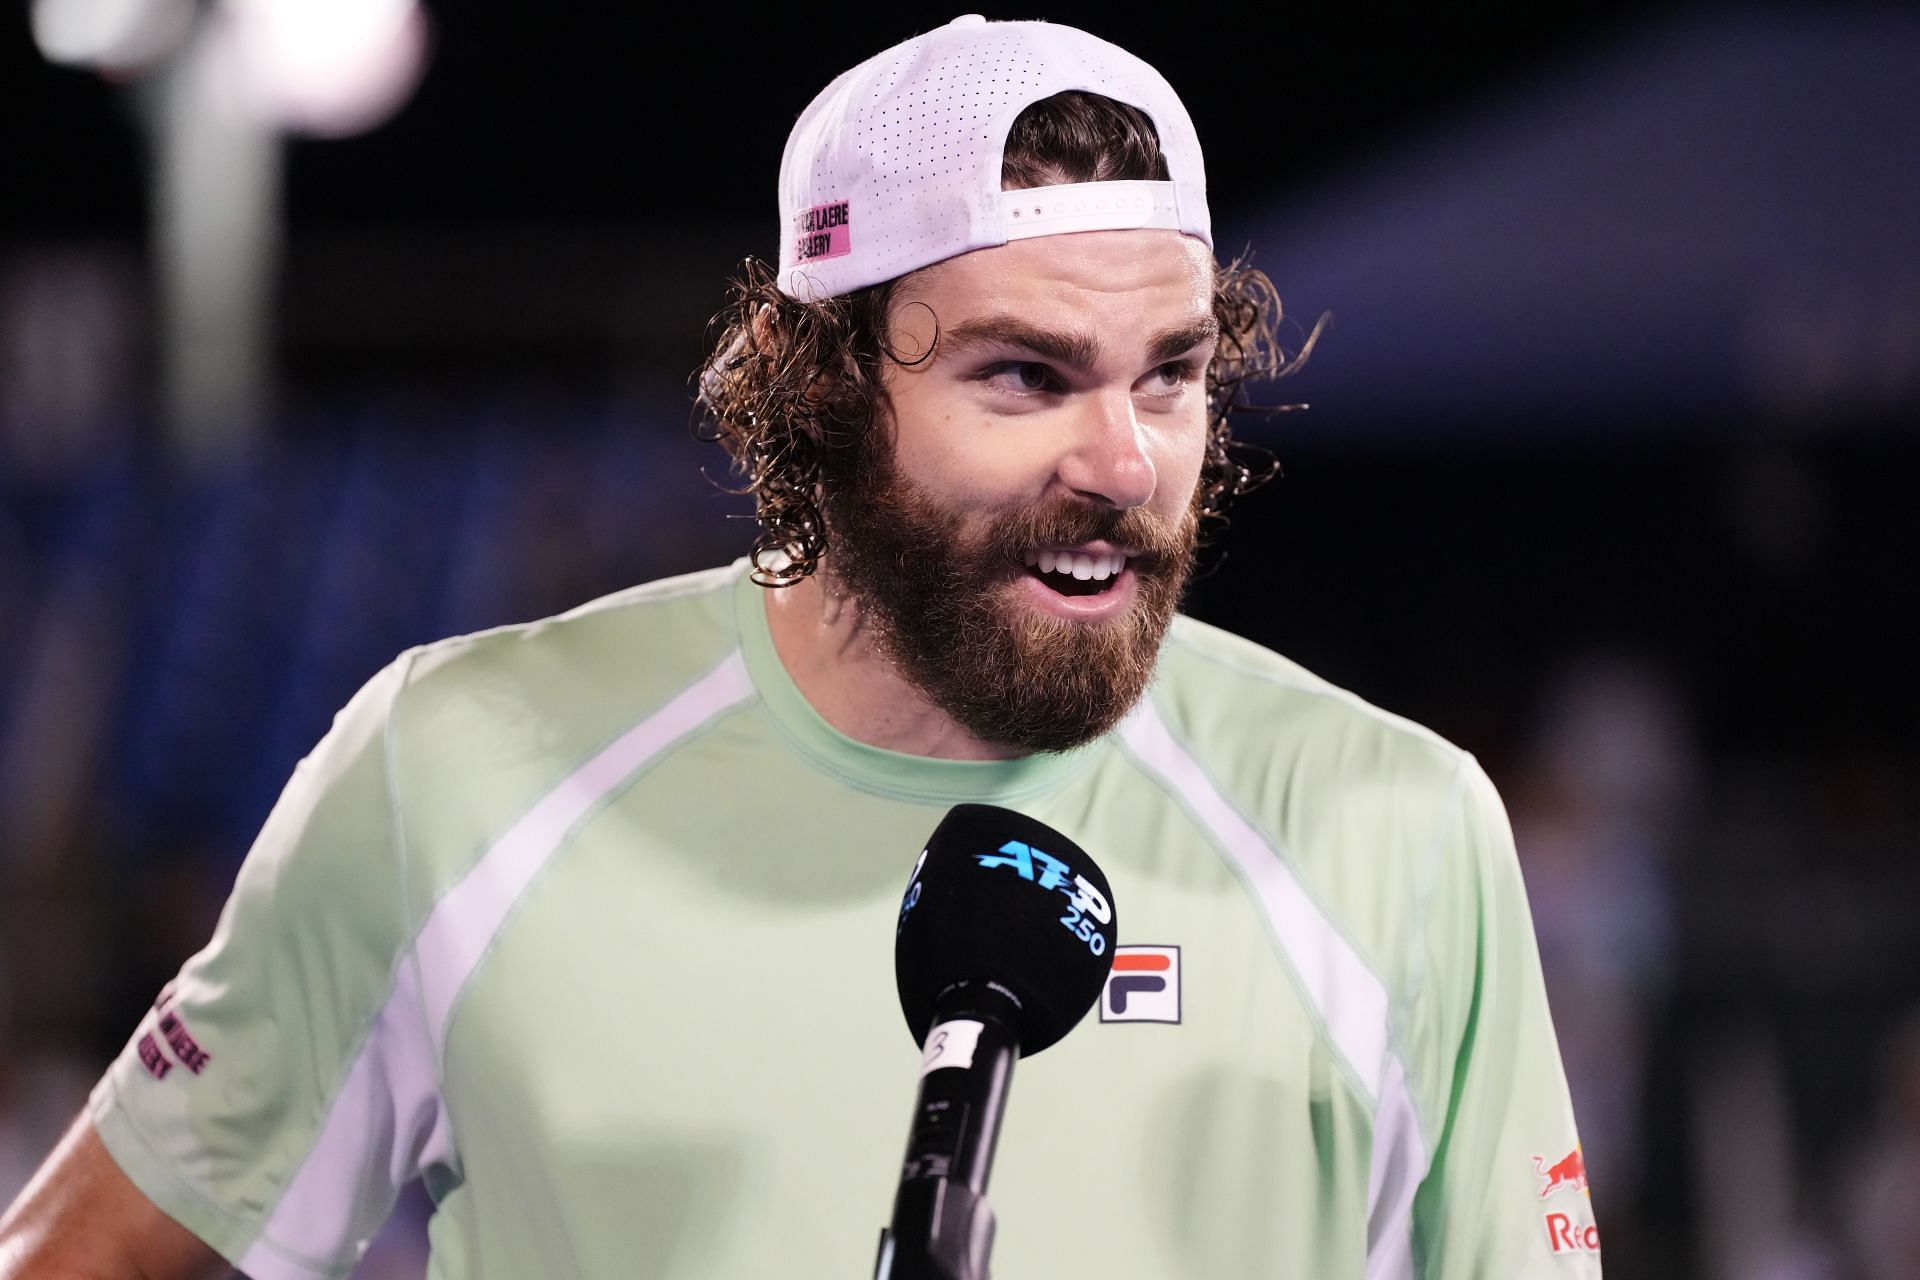 Reilly Opelka made his commentary debut at the Laver Cup